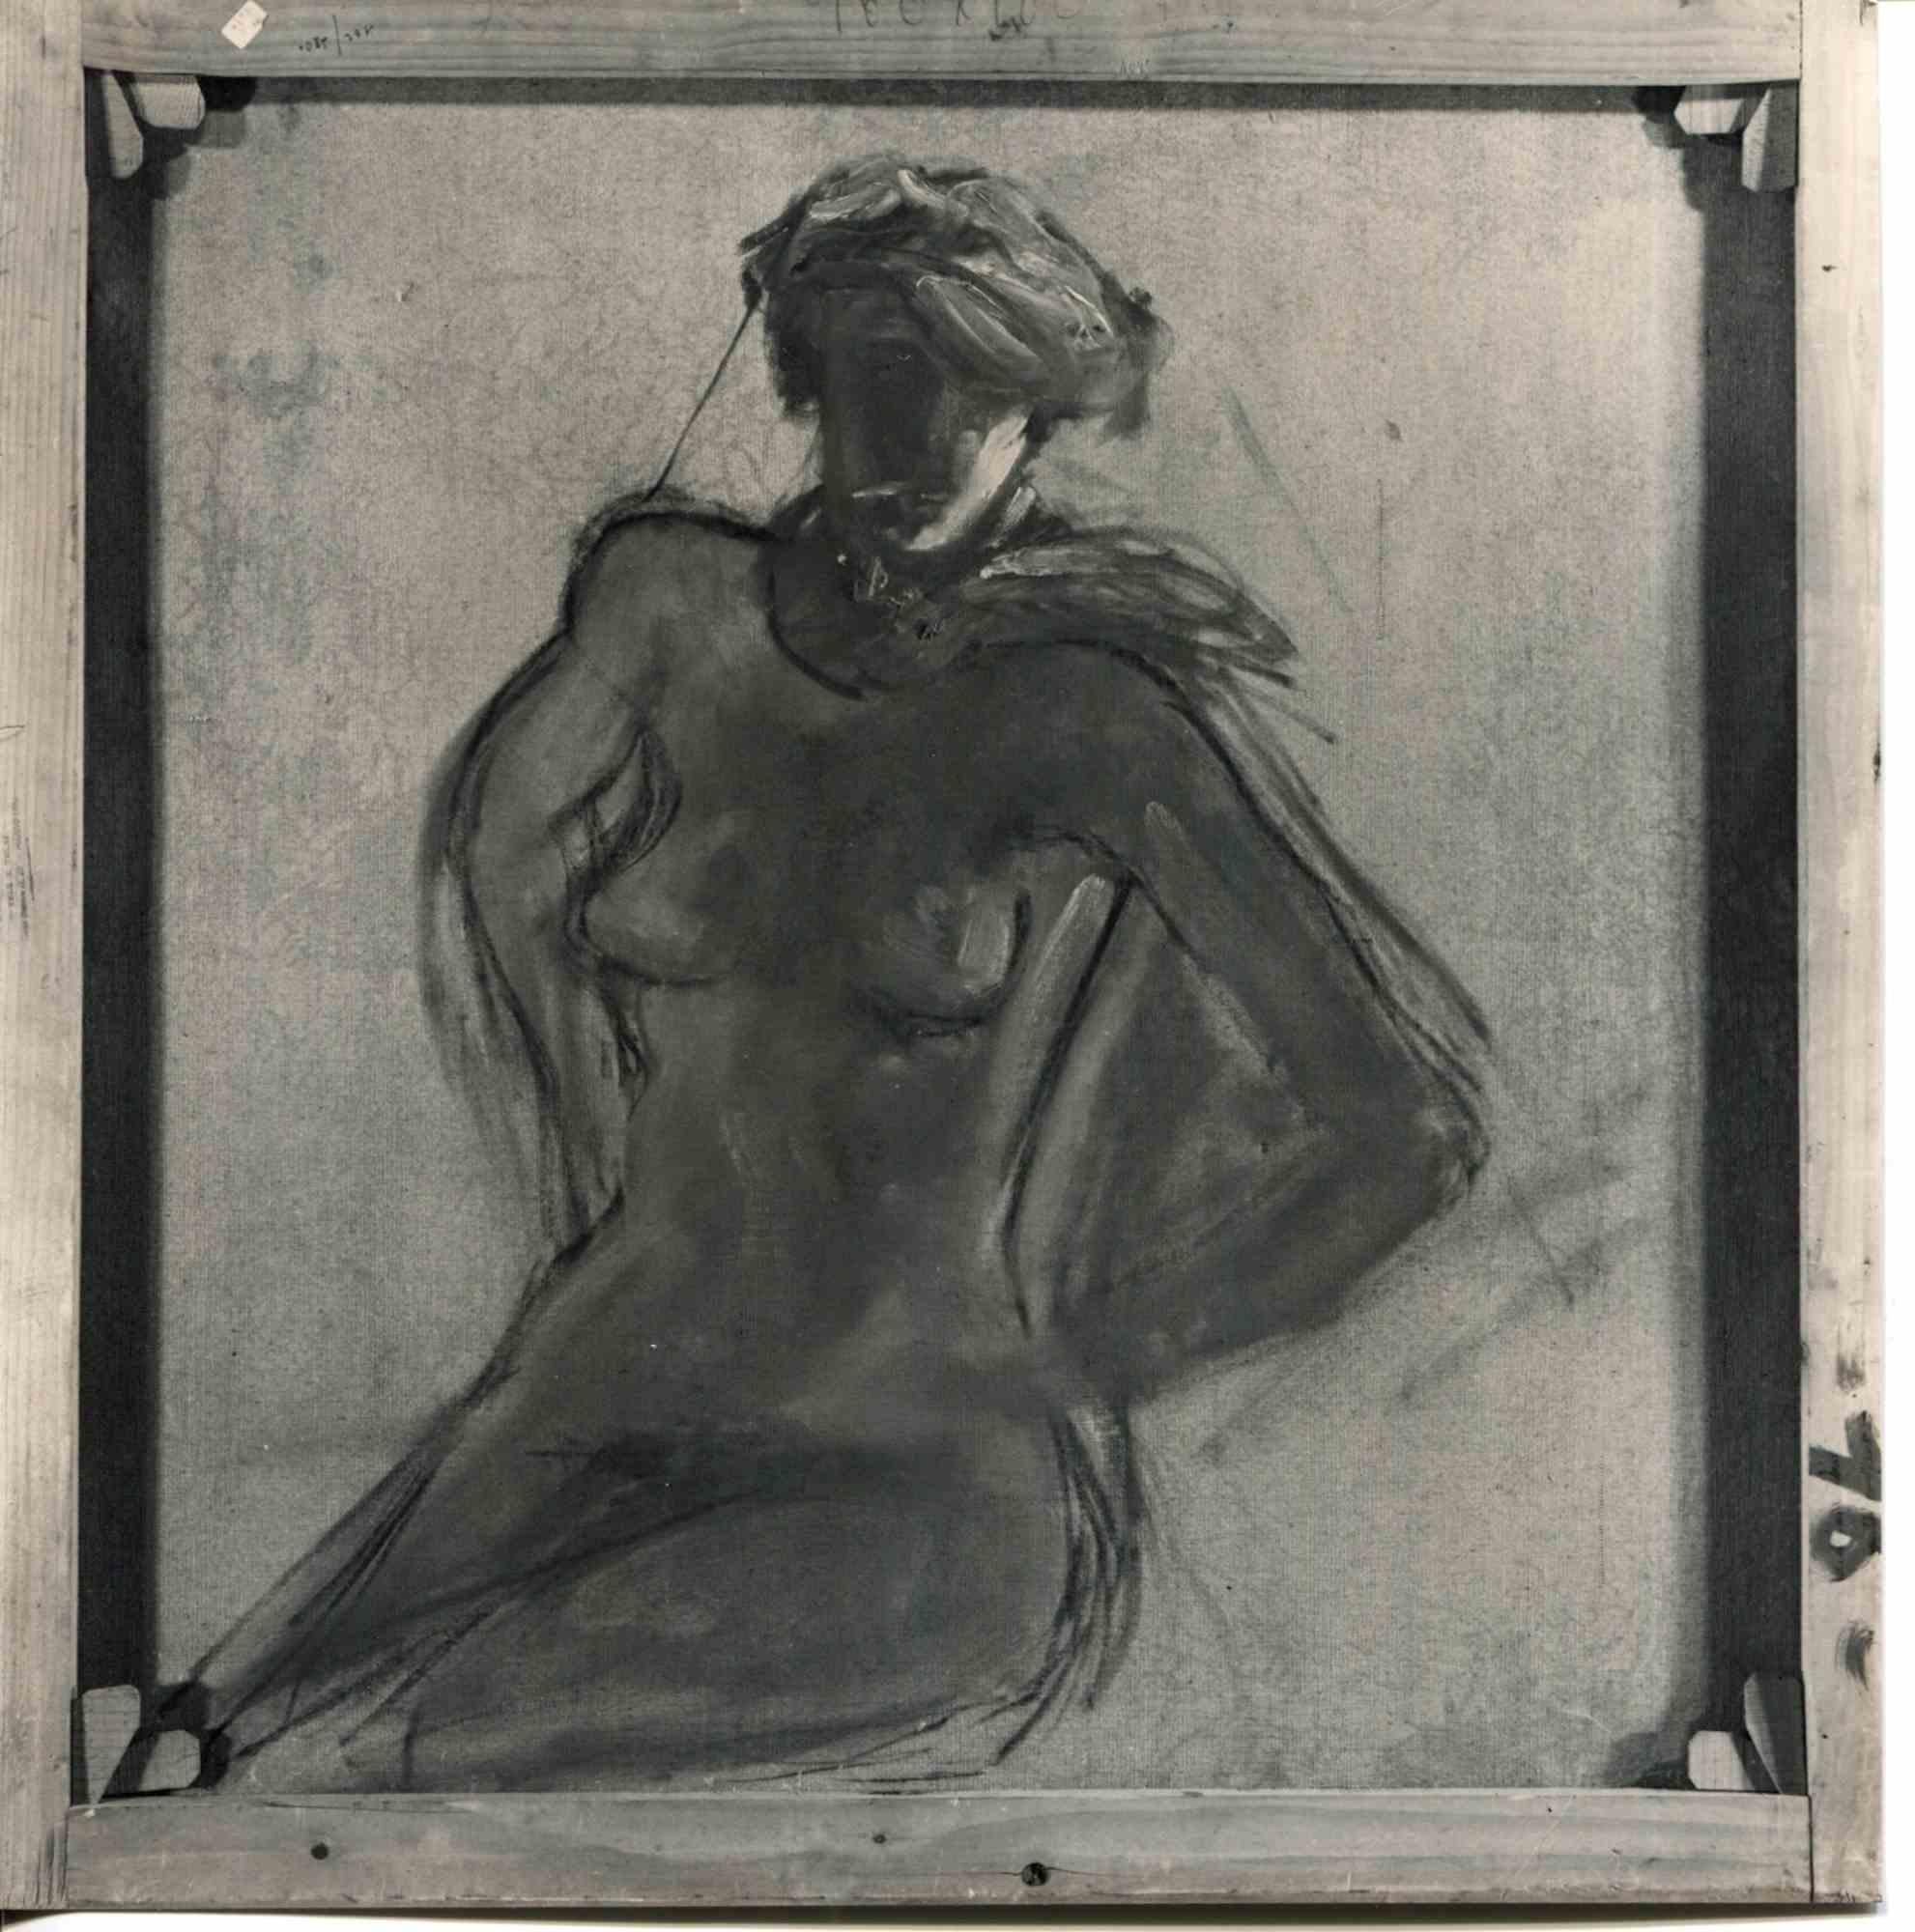 Unknown Figurative Photograph - Vintage Photo of a Painting by Antonio Peltrinelli- Photo - 1940s